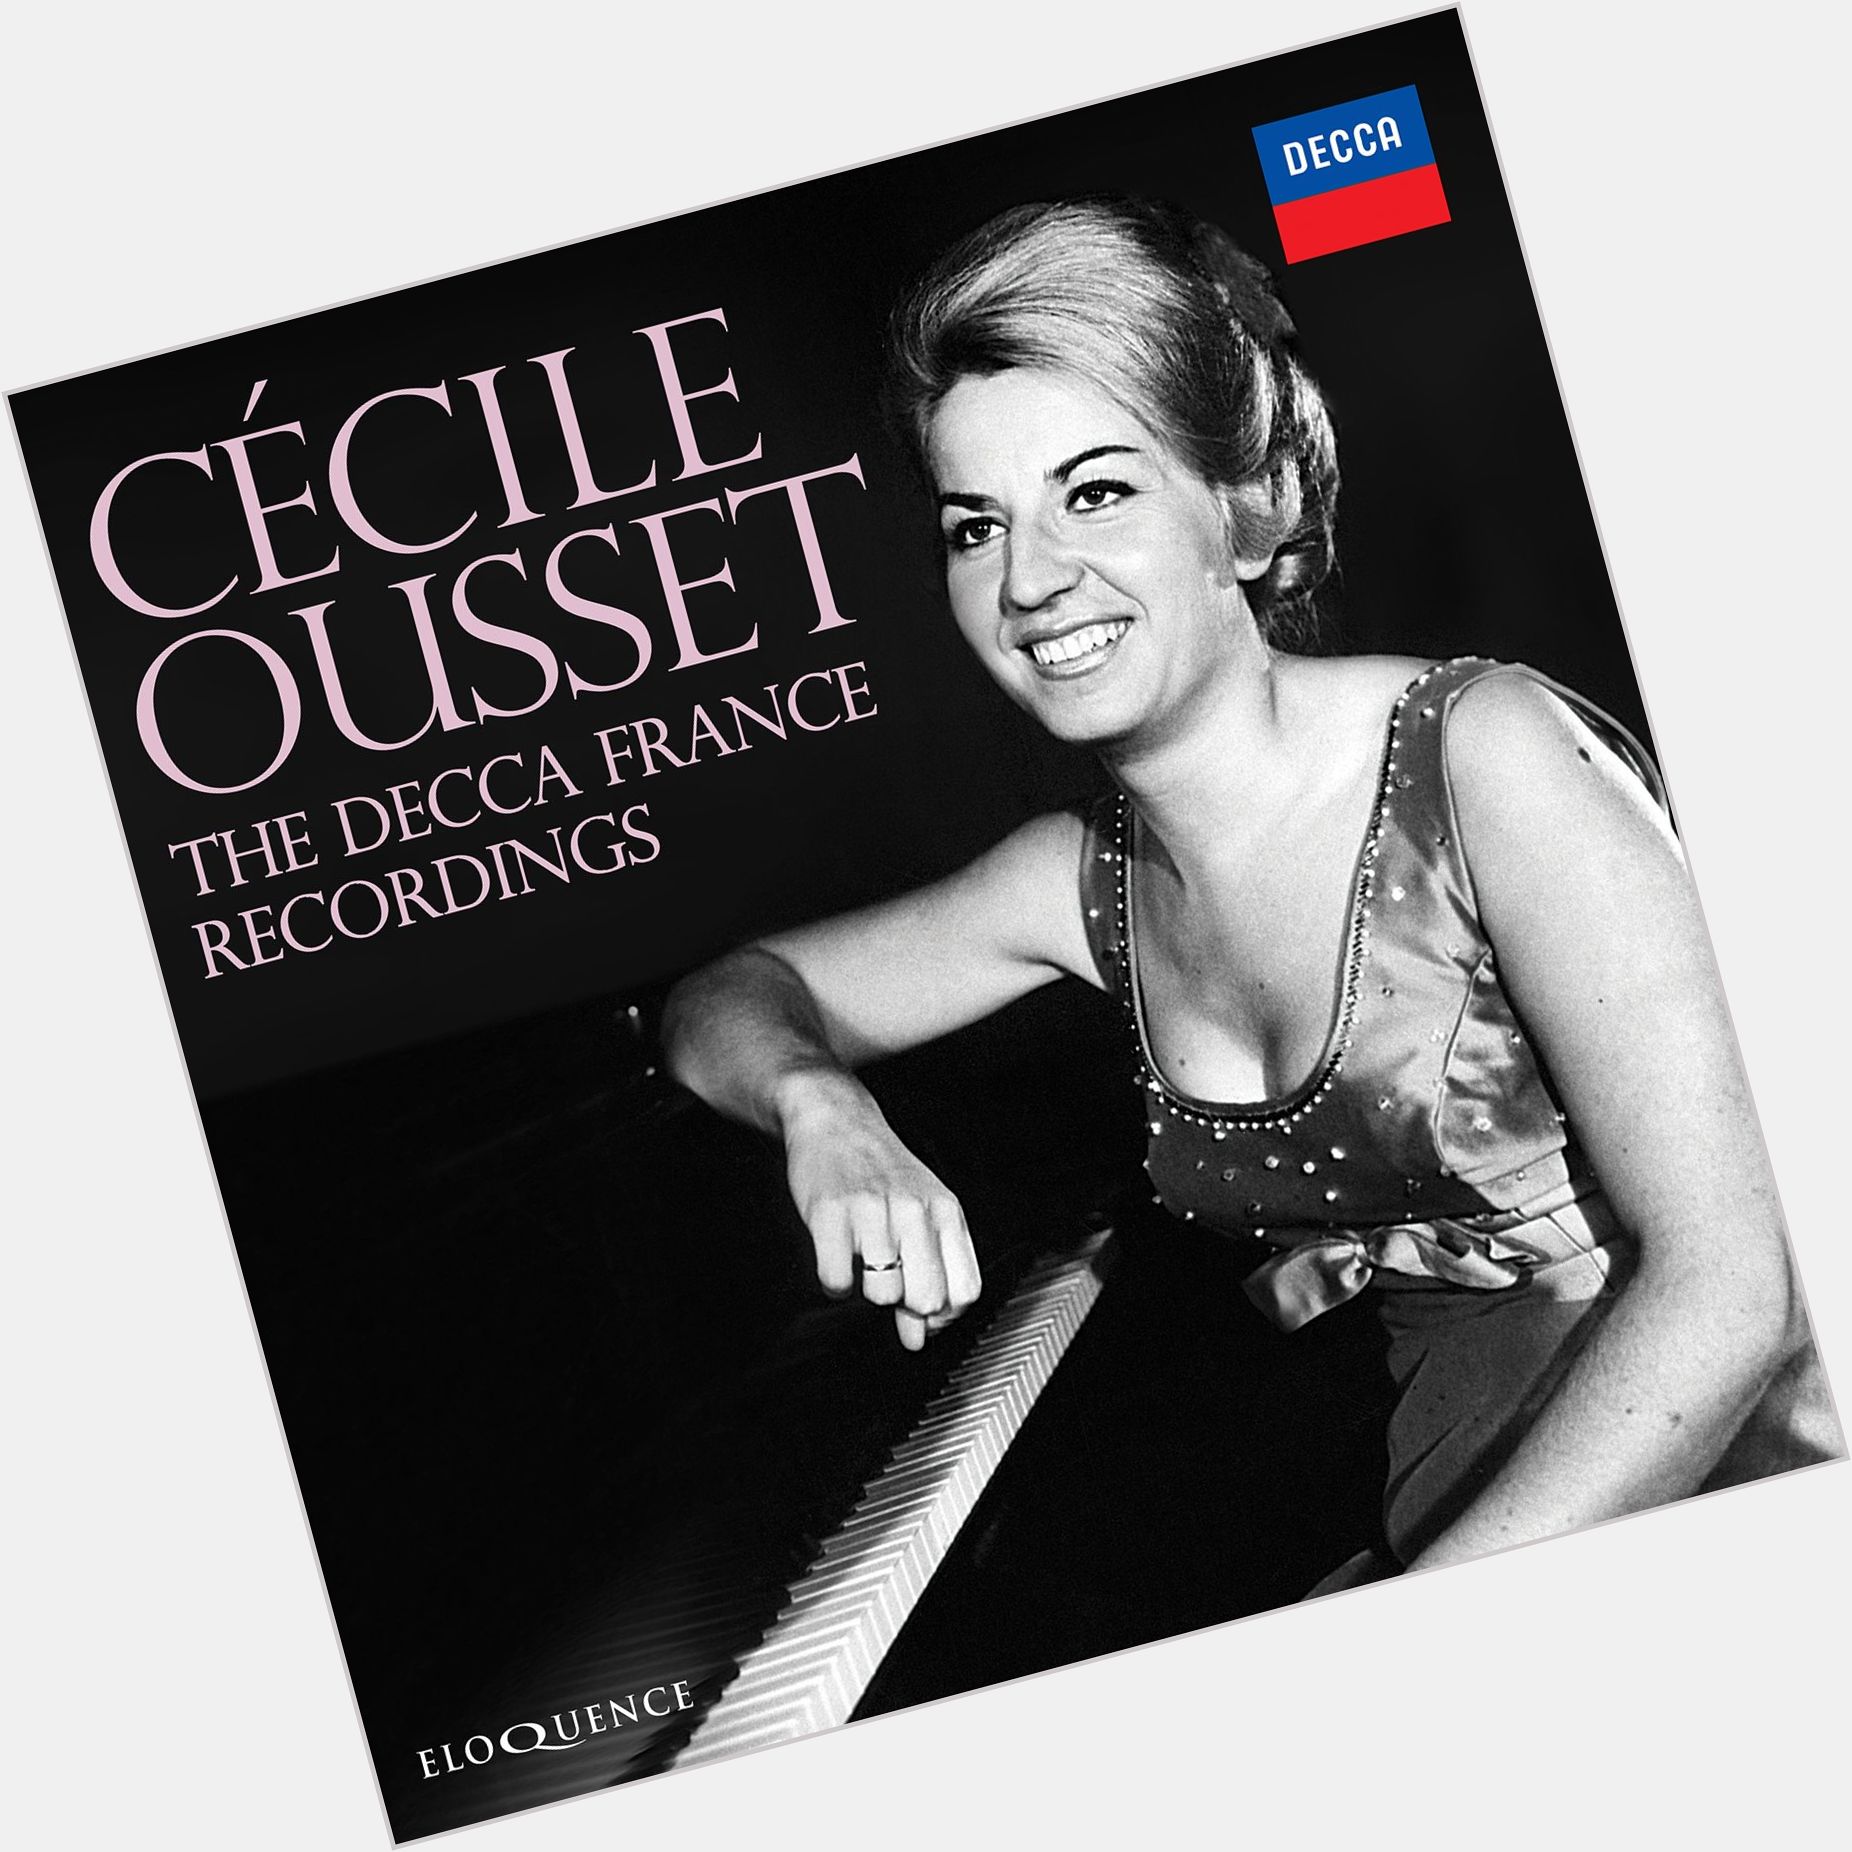 Cecile Ousset birthday 2015